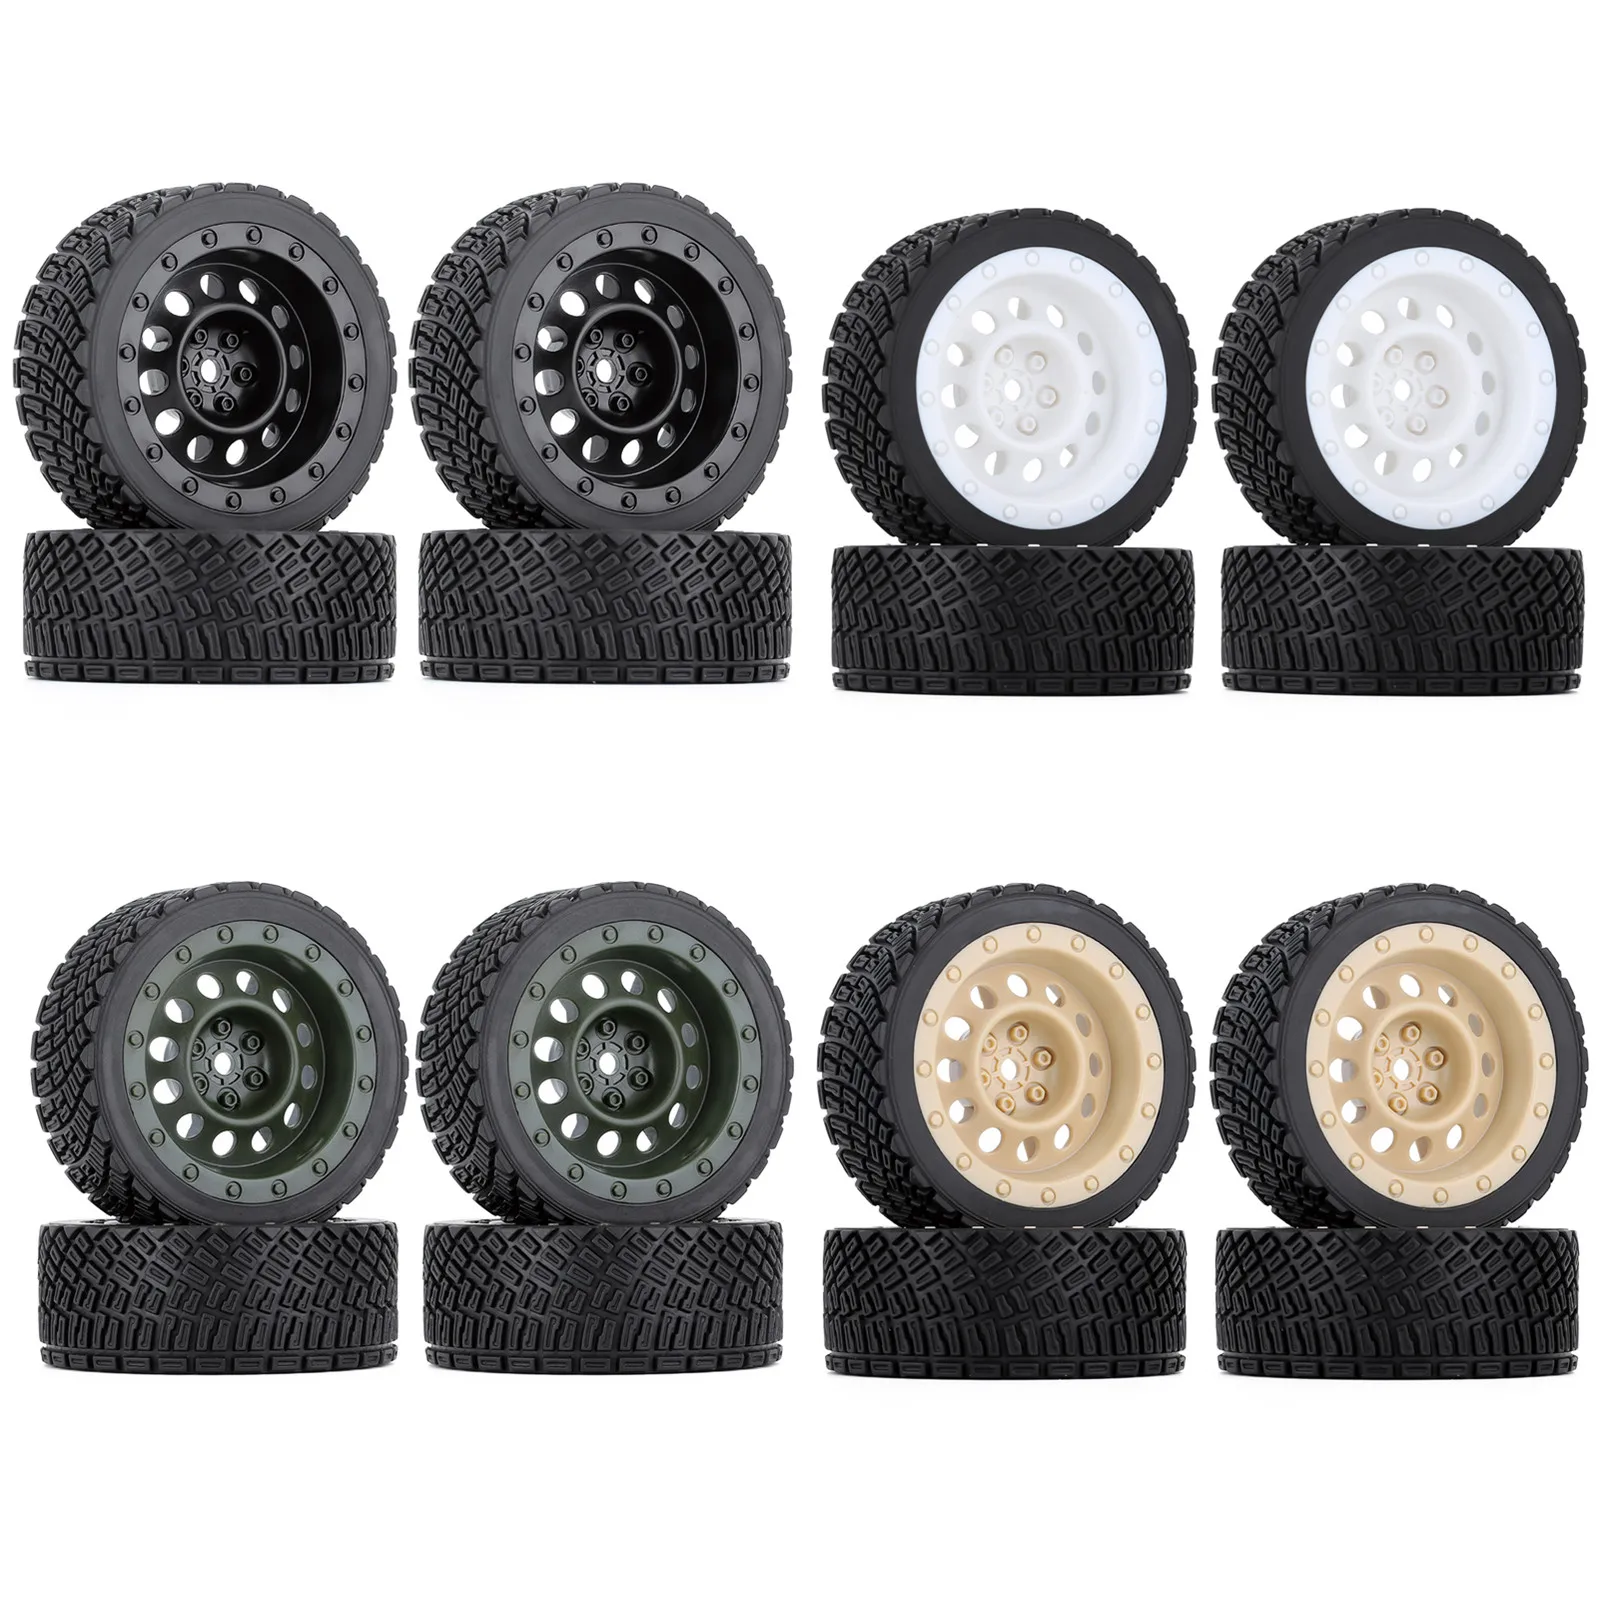 4Pack Black/Yellow/White/Green Optional 1/10 RC Car Off-Road Wheel Rubber Tires Rim Repalce For Rally